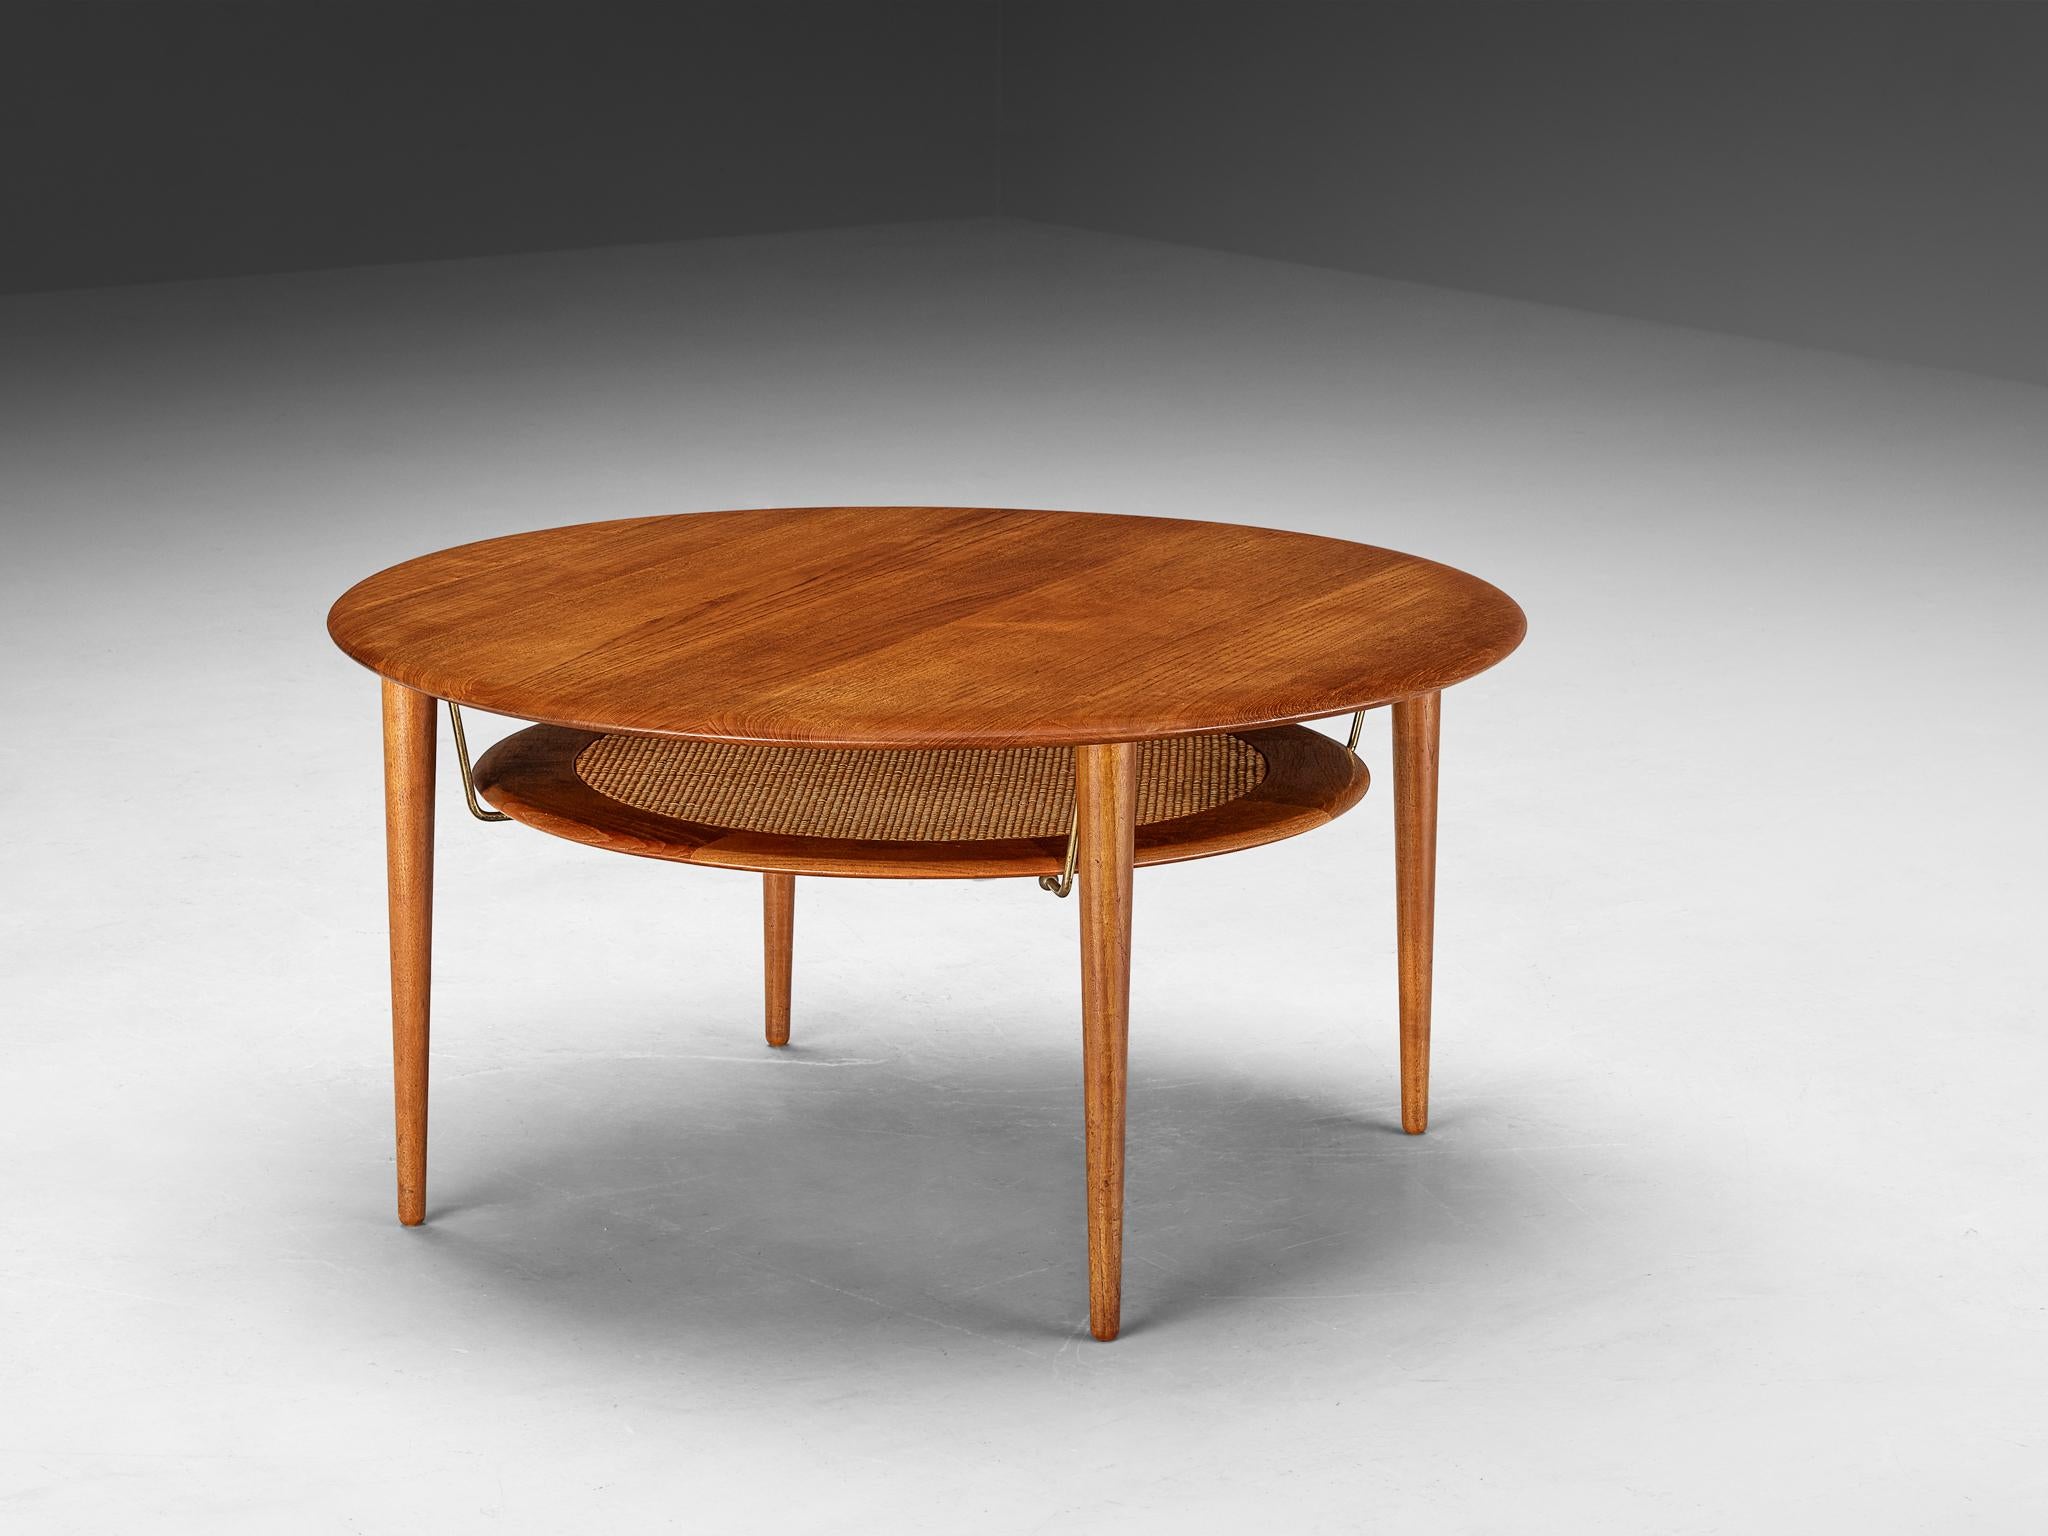 Peter Hvidt & Orla Mølgaard-Nielsen for France & Søn, coffee table, model 'FD 515' teak, brass, Denmark, 1950s

An impeccably crafted coffee table, designed by the renowned design duo Peter Hvidt & Orla Mølgaard-Nielsen for France & Søn in the